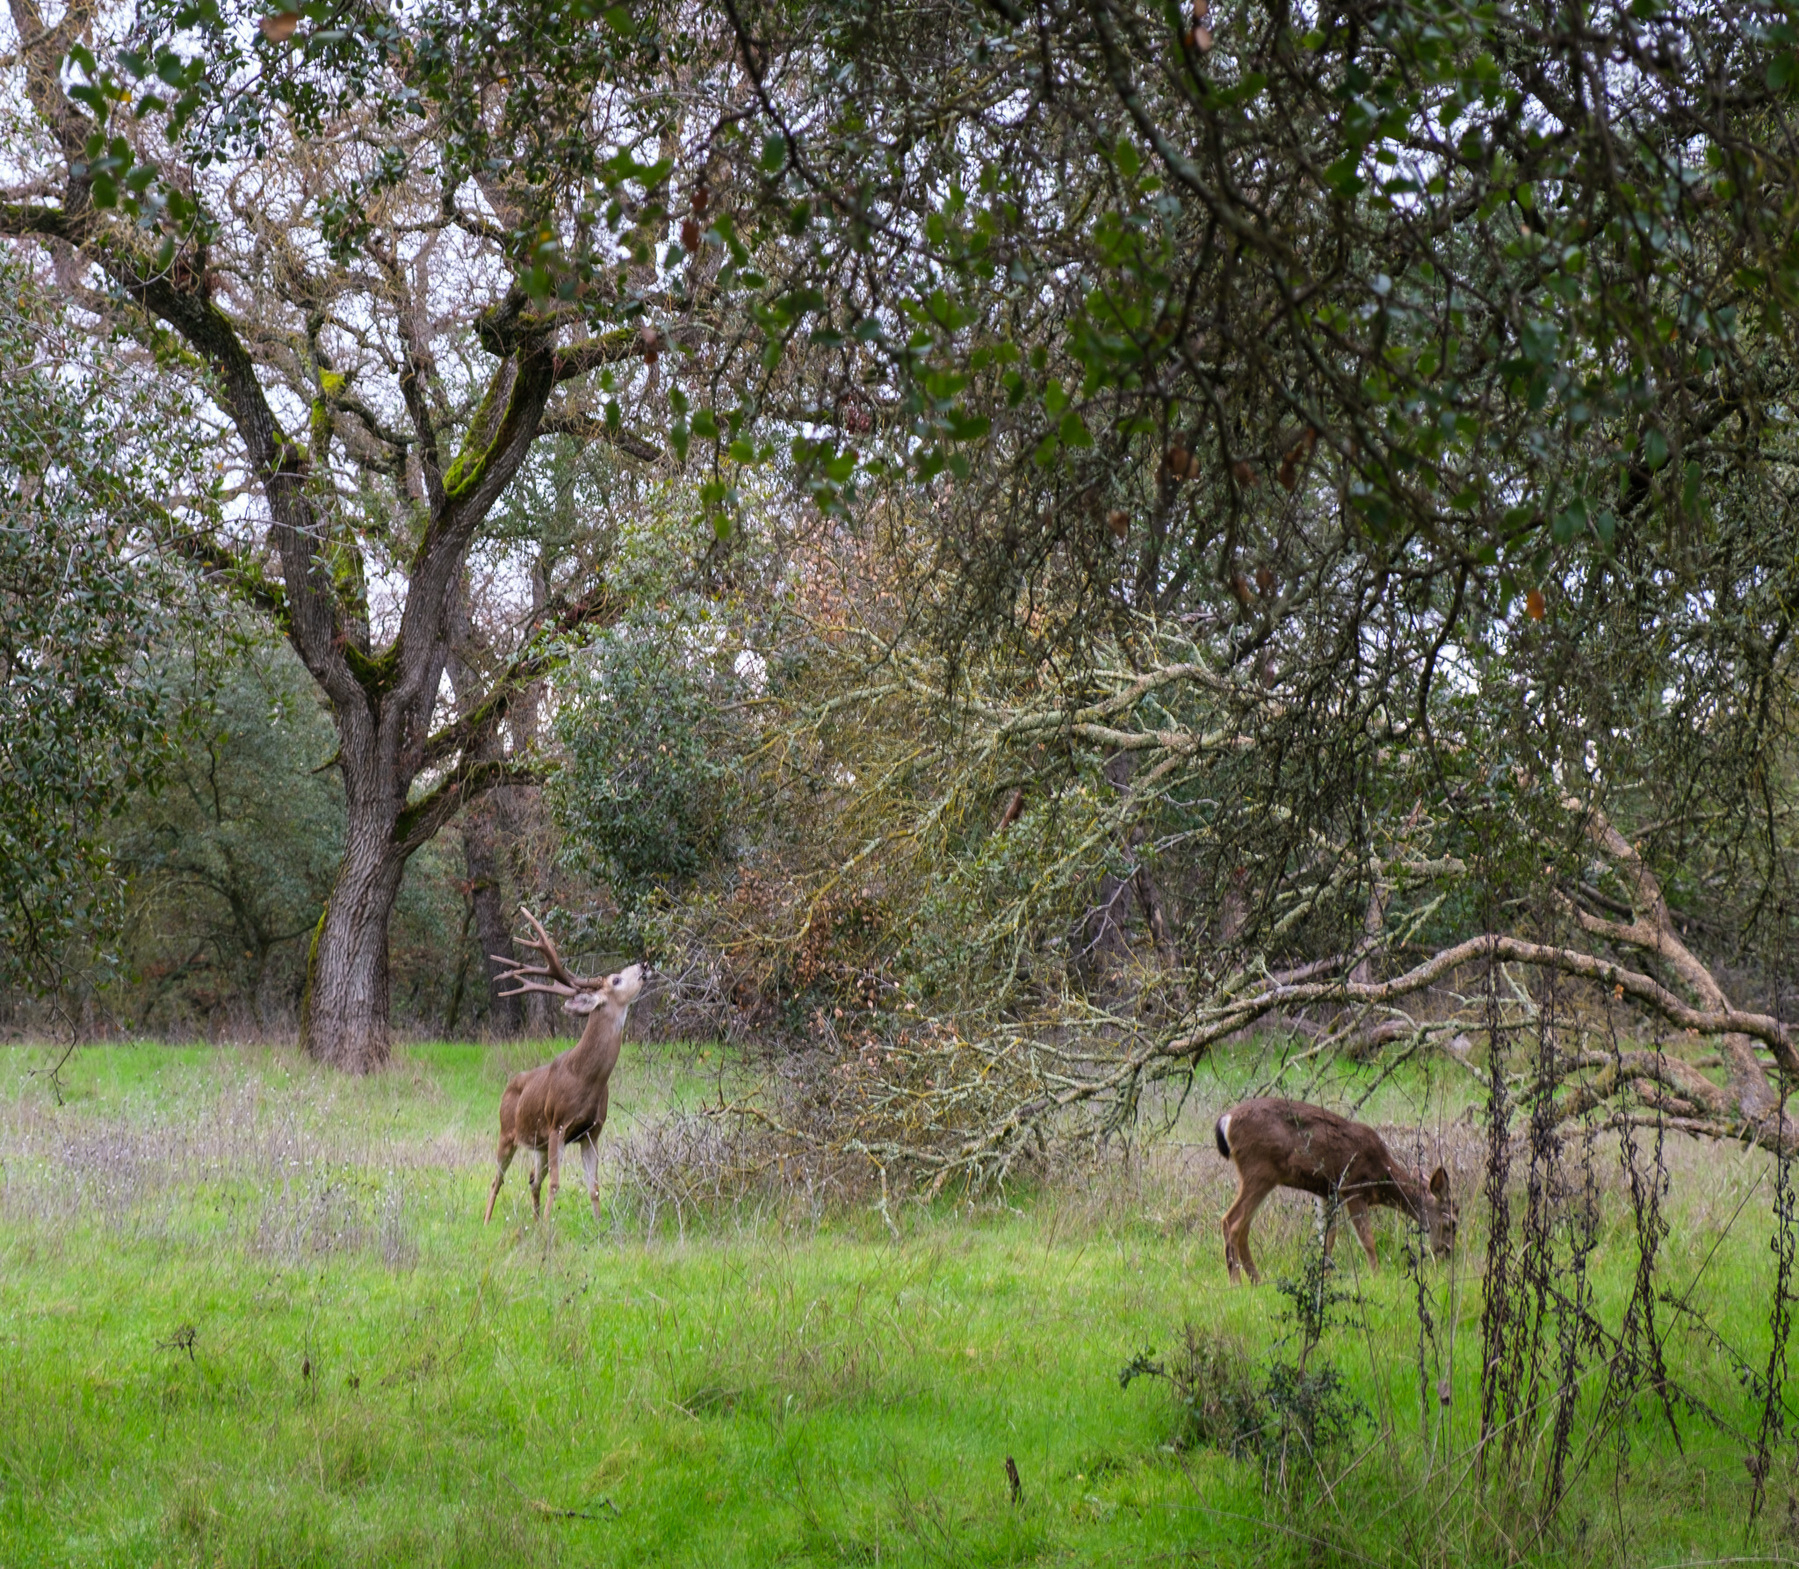 On the left of the frame, a buck (deer) eating leaves from the low branches of a tree. A doe (deer) is grazing the grass on the right of the frame. 